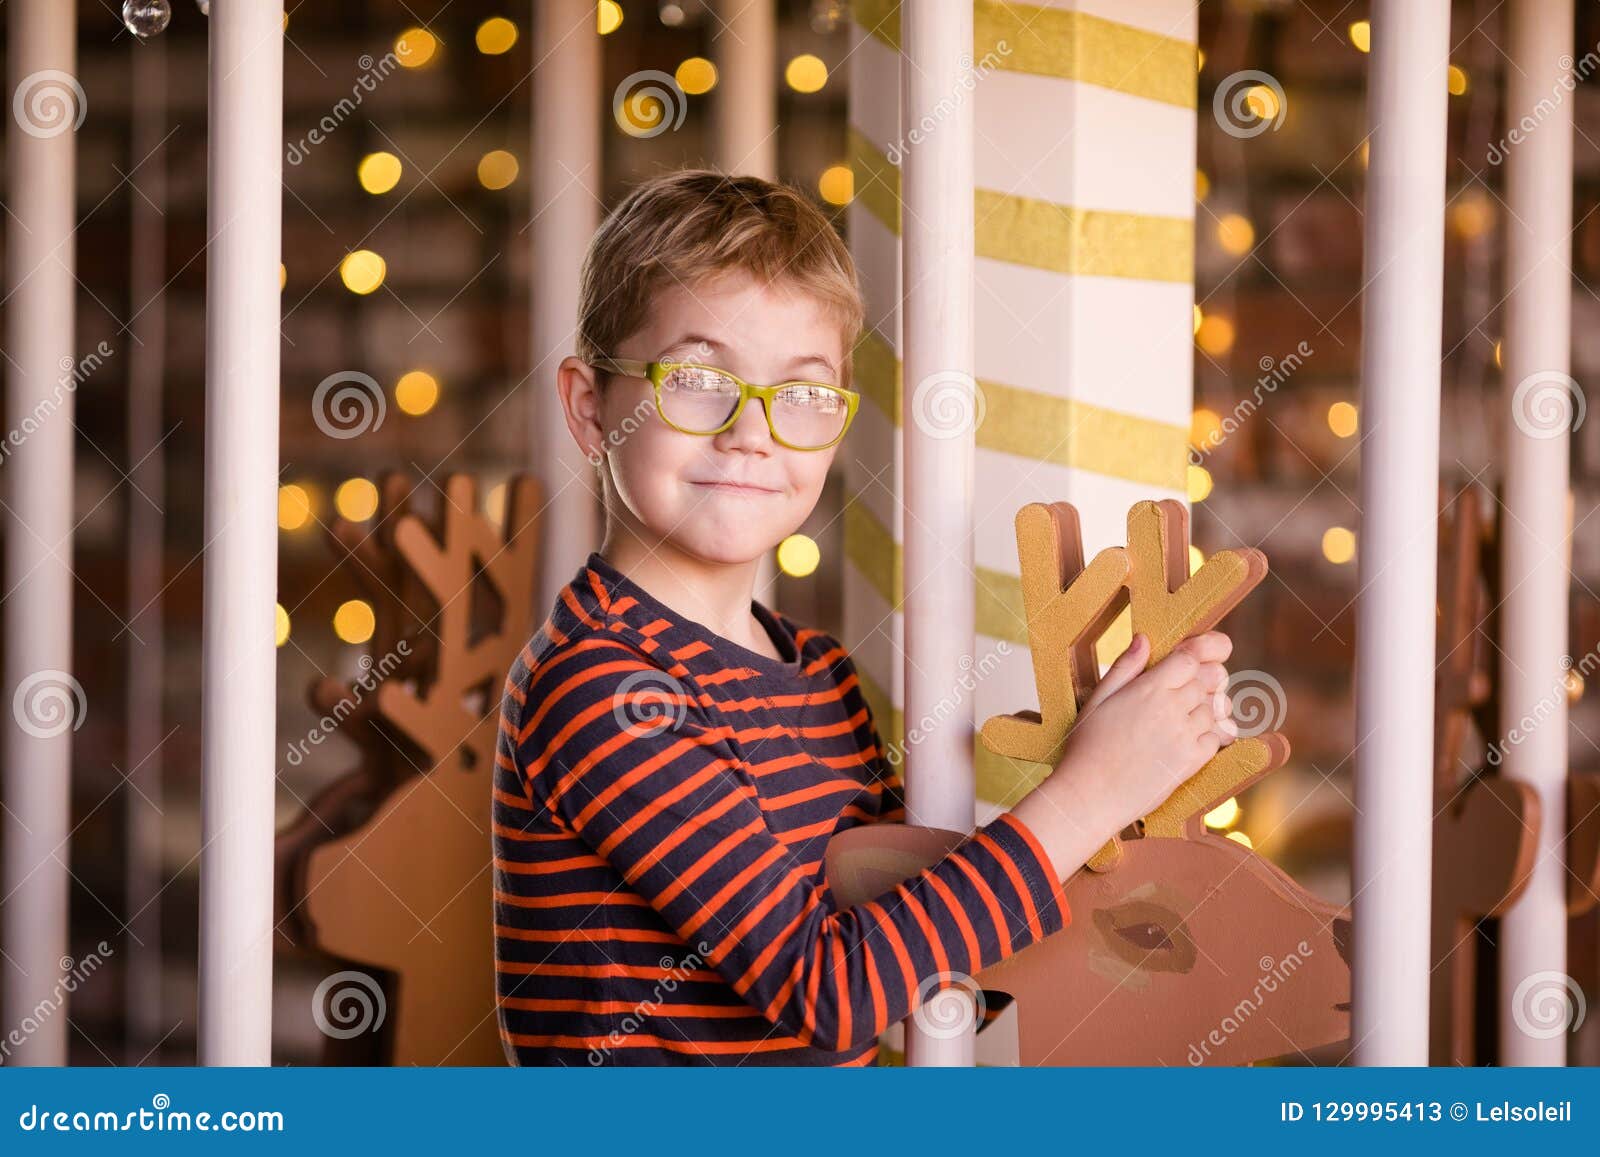 Blonde Boy with Glasses - wide 8